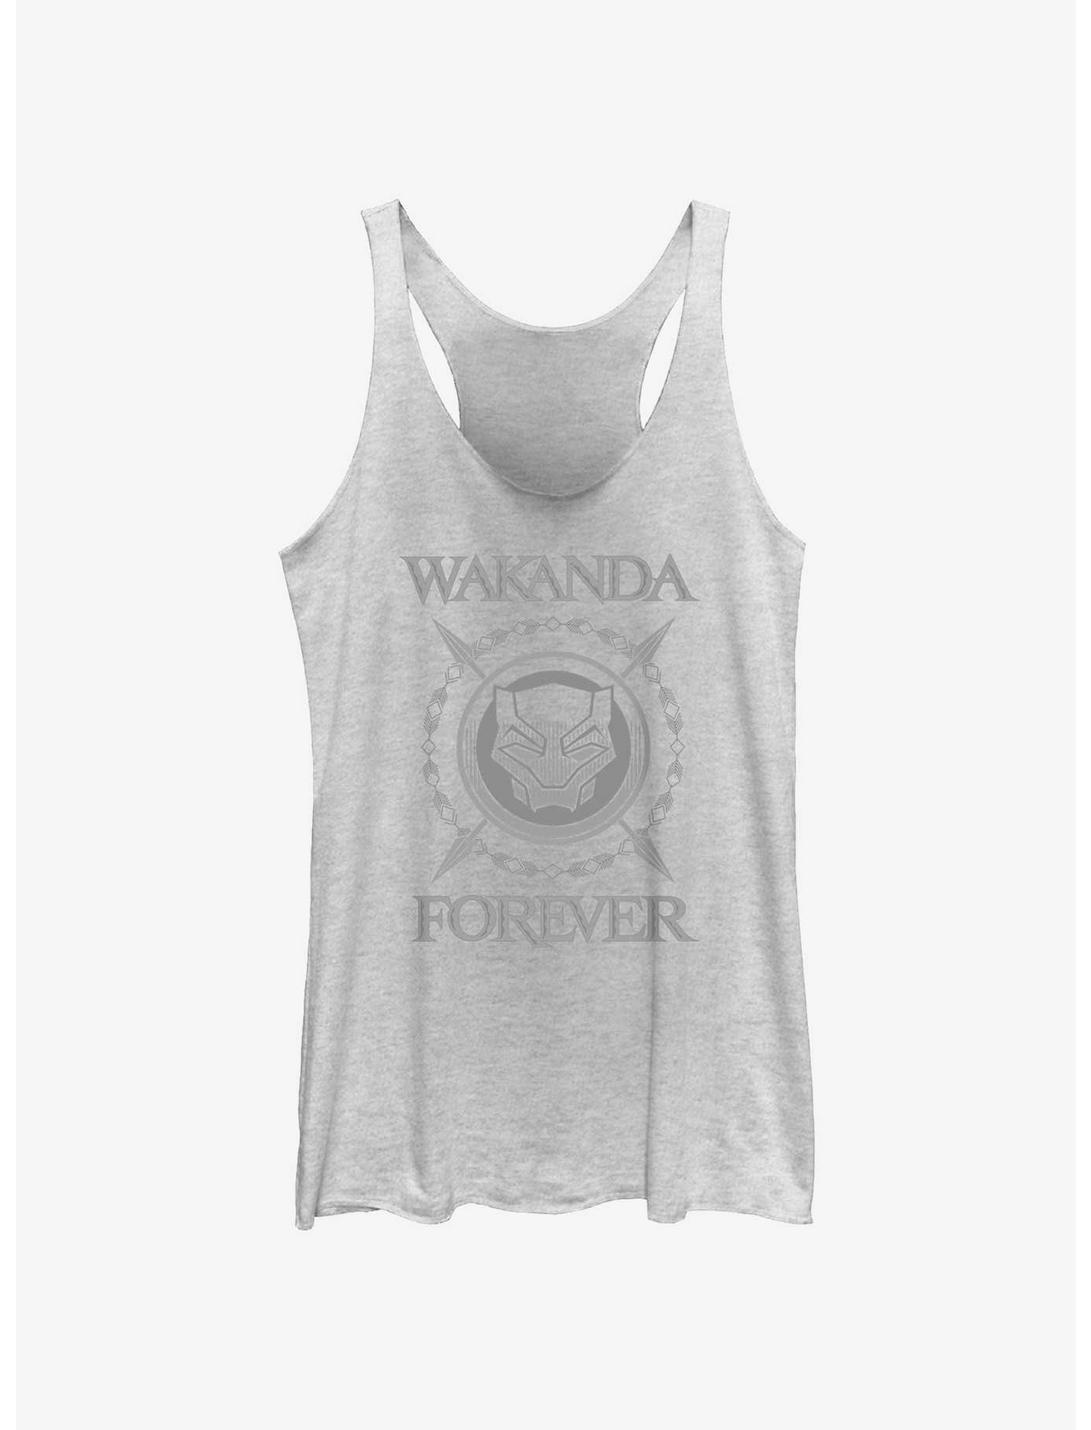 Marvel Black Panther: Wakanda Forever Spears Womens Tank Top, WHITE HTR, hi-res